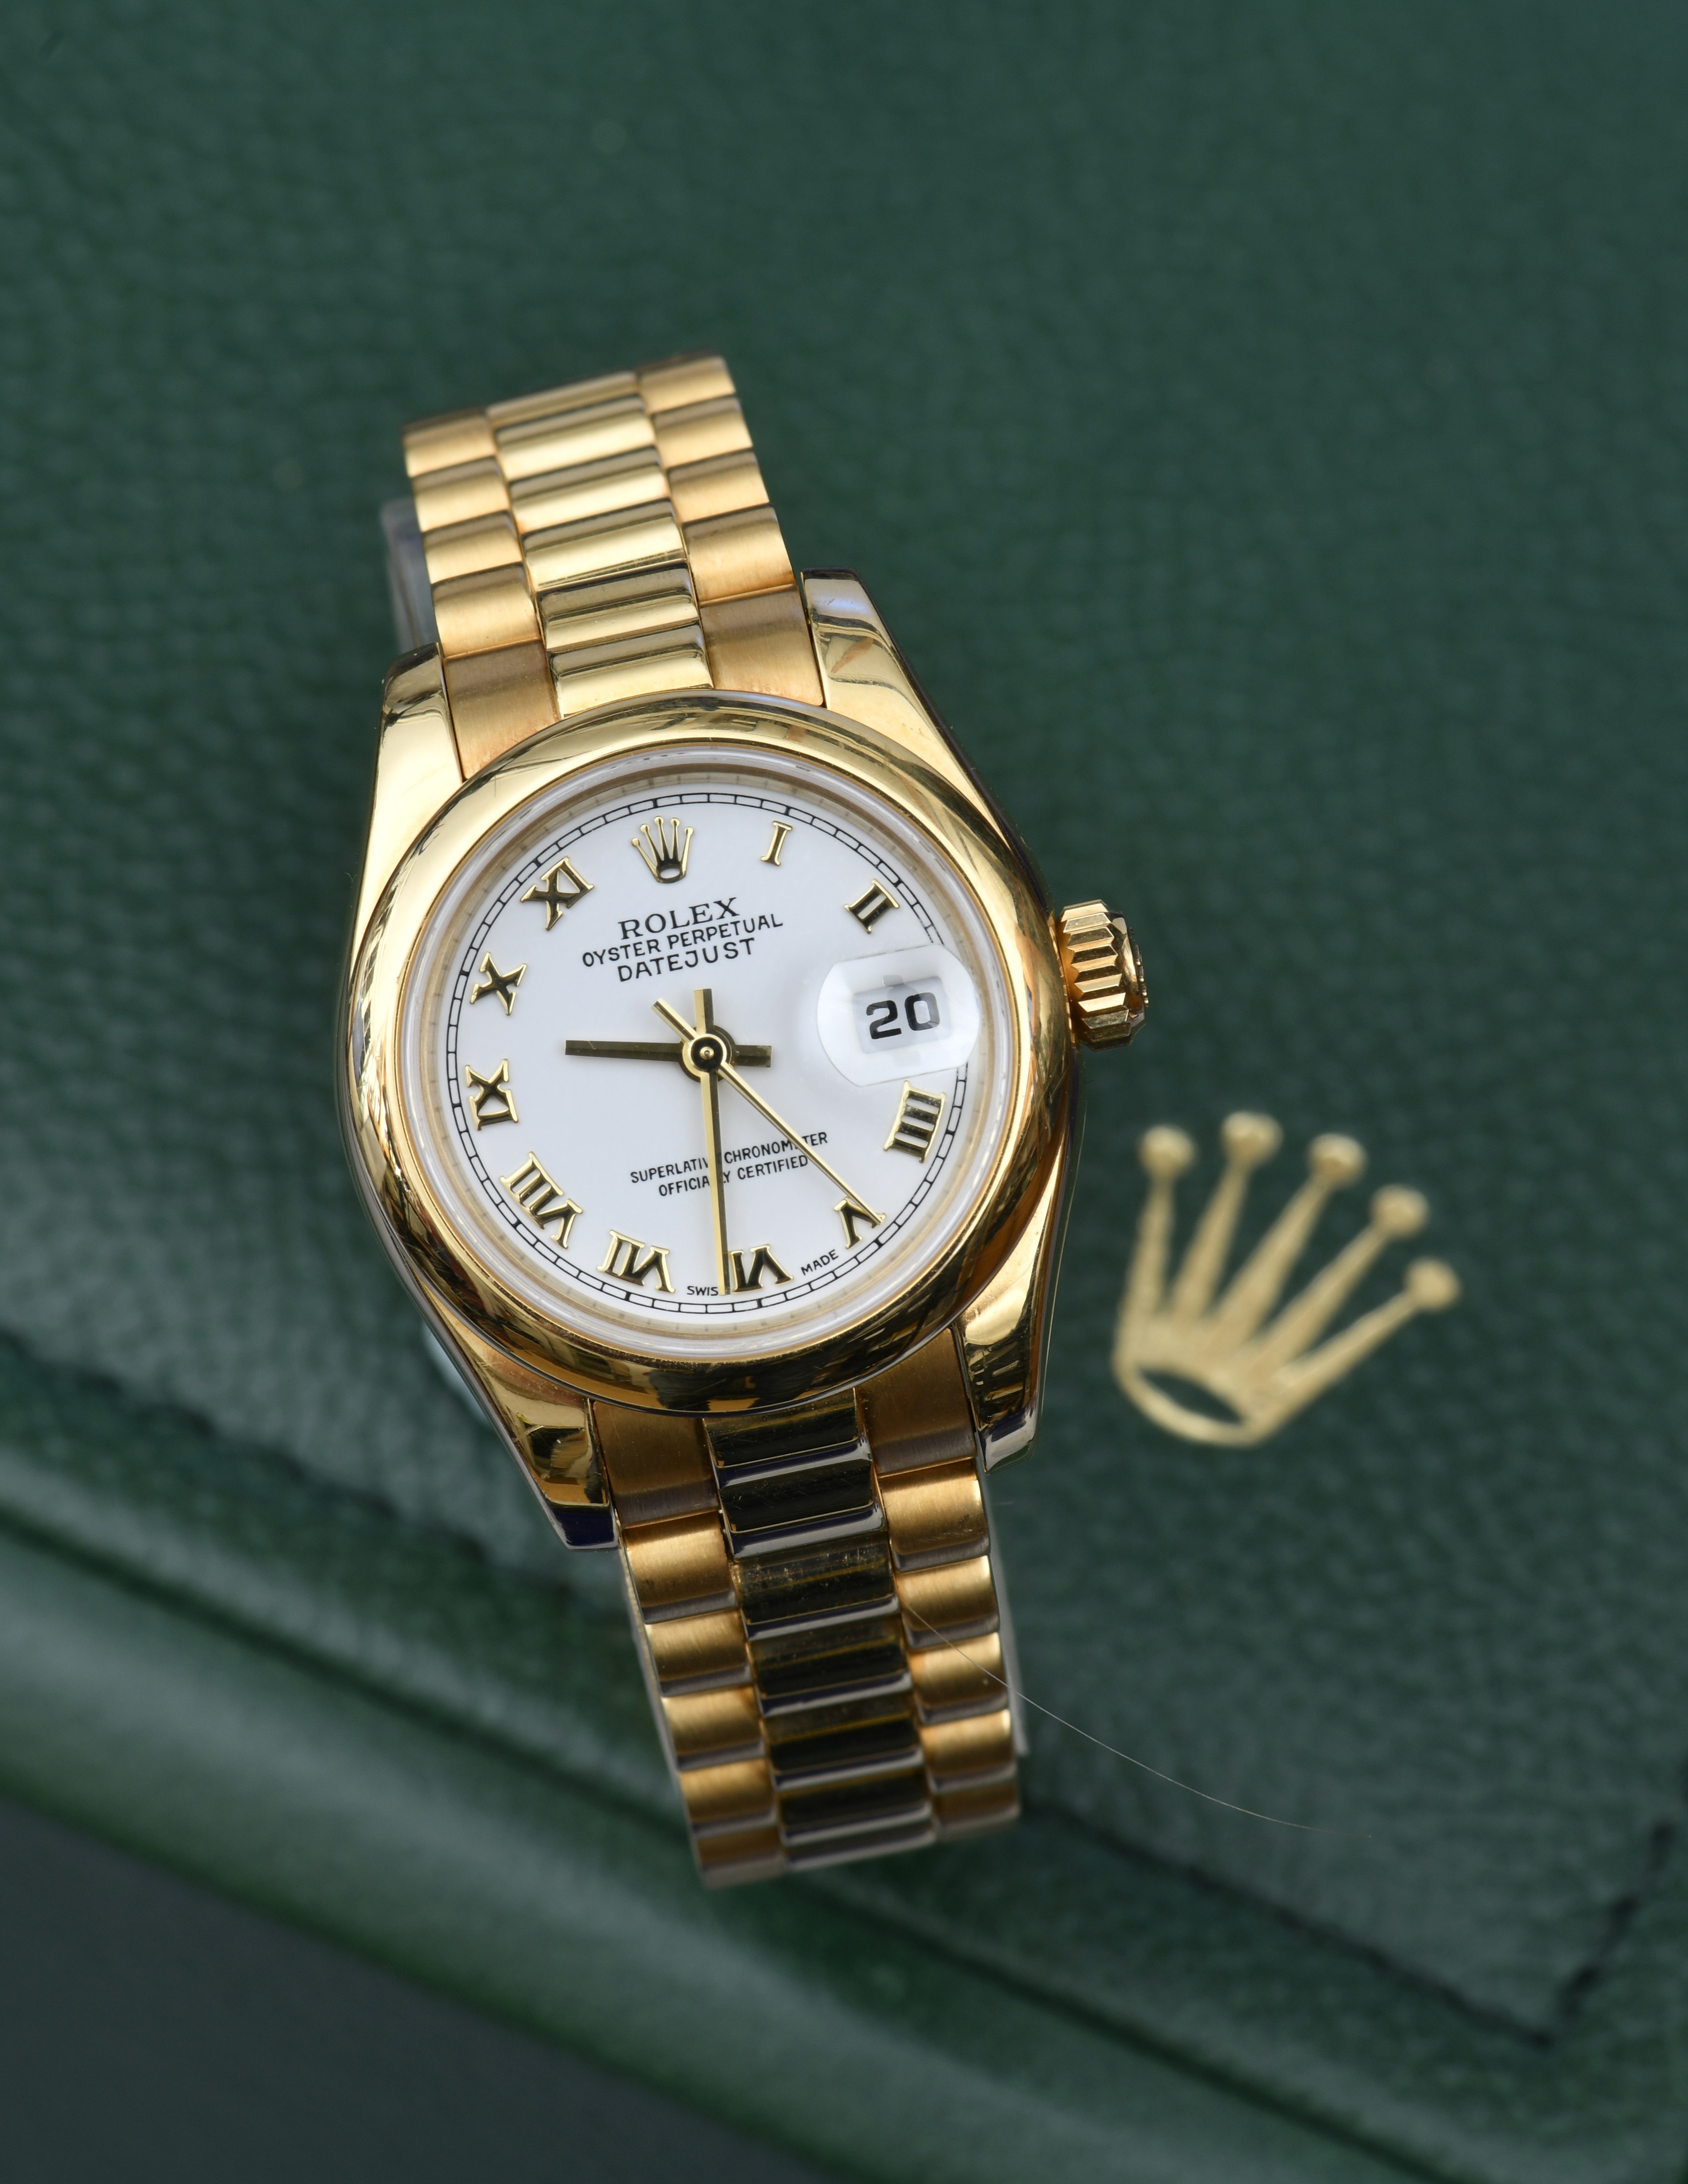 Rolex Oyster Perpetual Datejust 18ct gold ladies automatic wristwatch ref. 179168 with date - Image 5 of 8